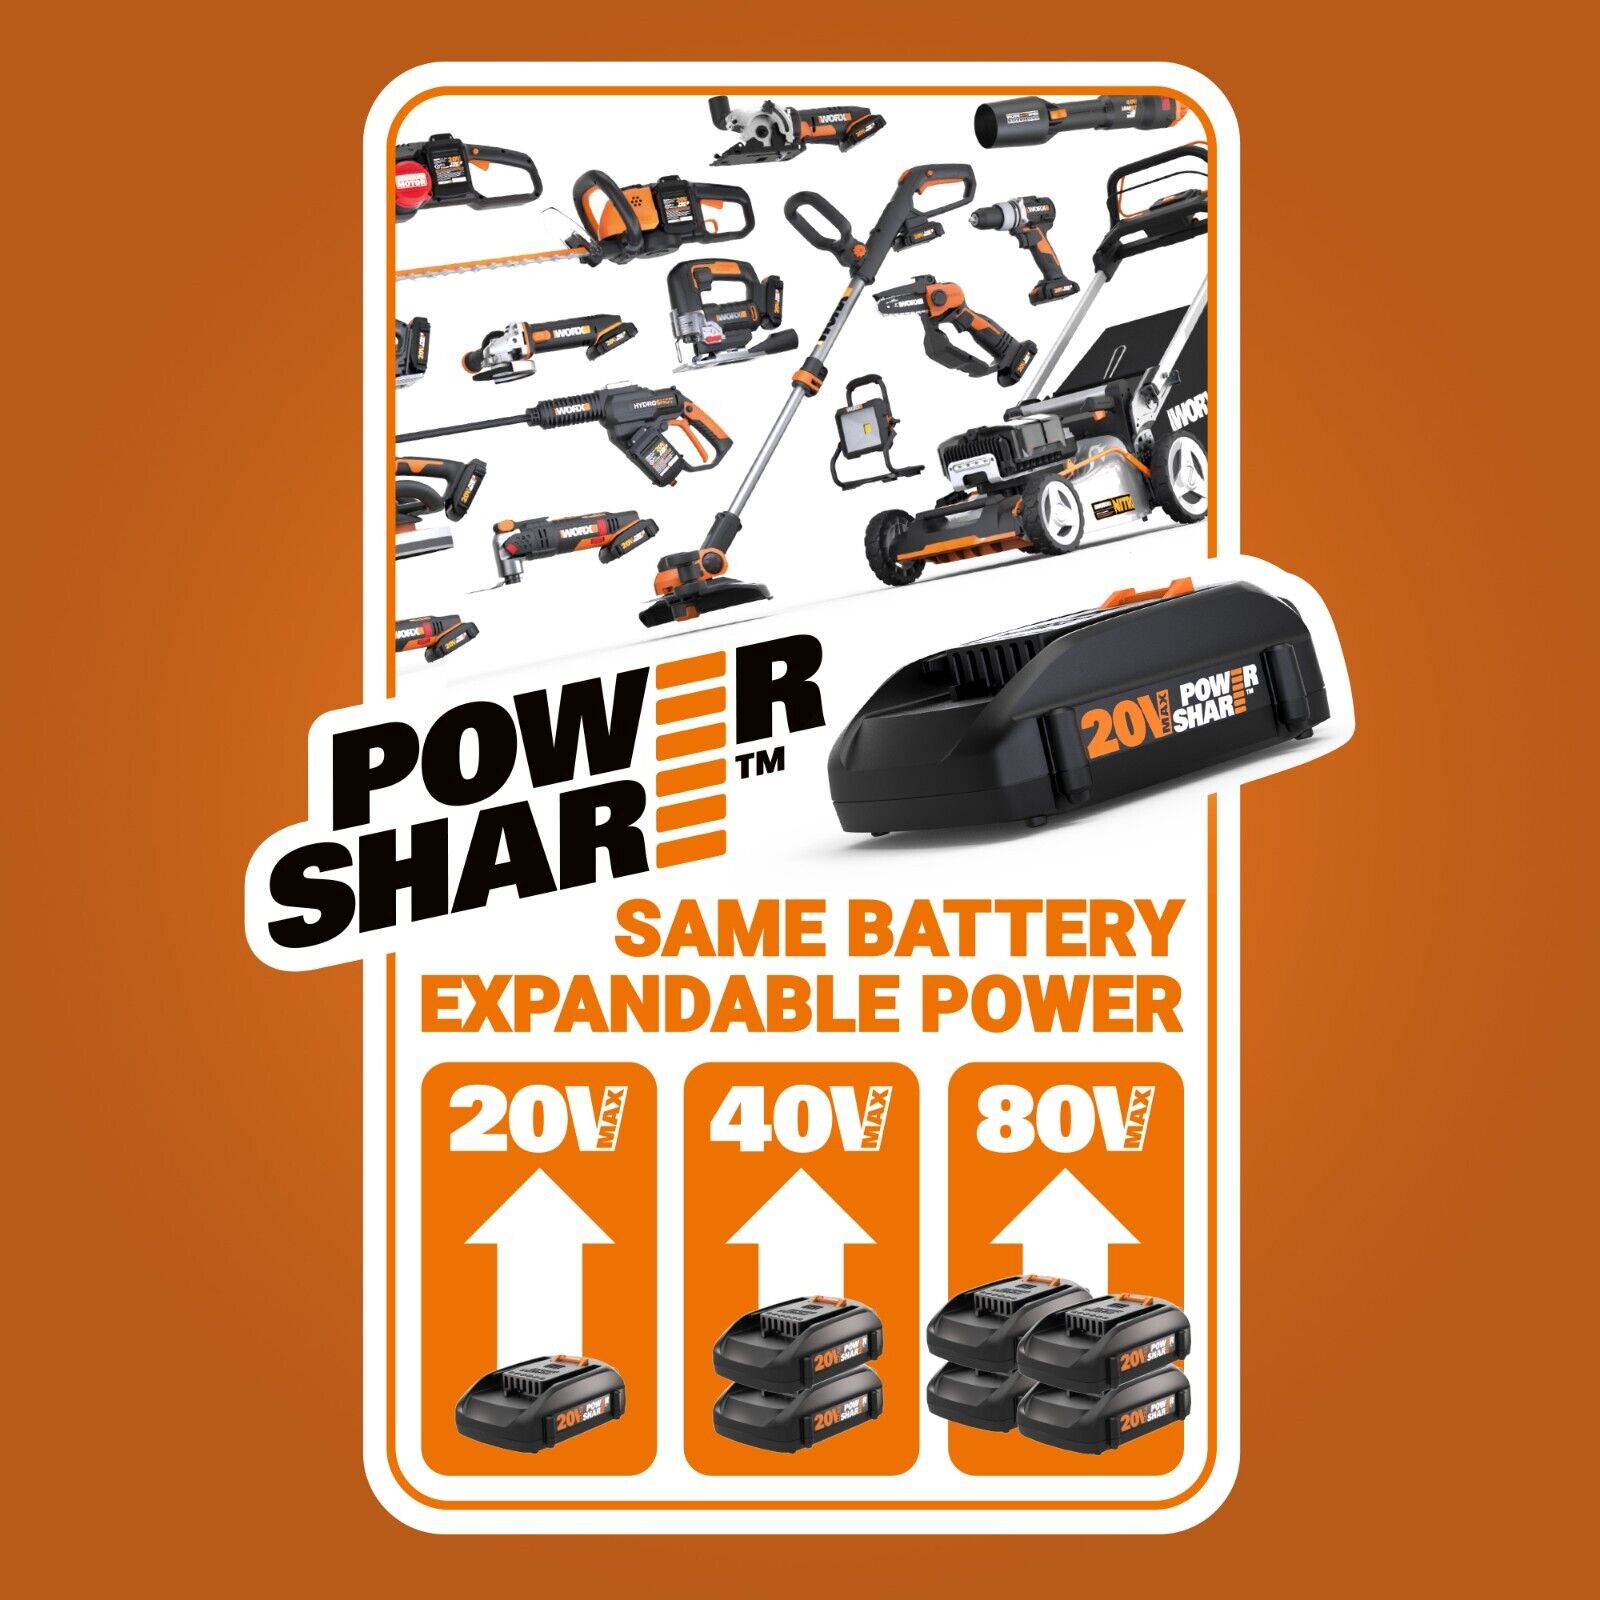 WORX WX523L 20 Volt Power Share 3.375 Inch Worxsaw Compact Circular Saw Tool - image 2 of 7